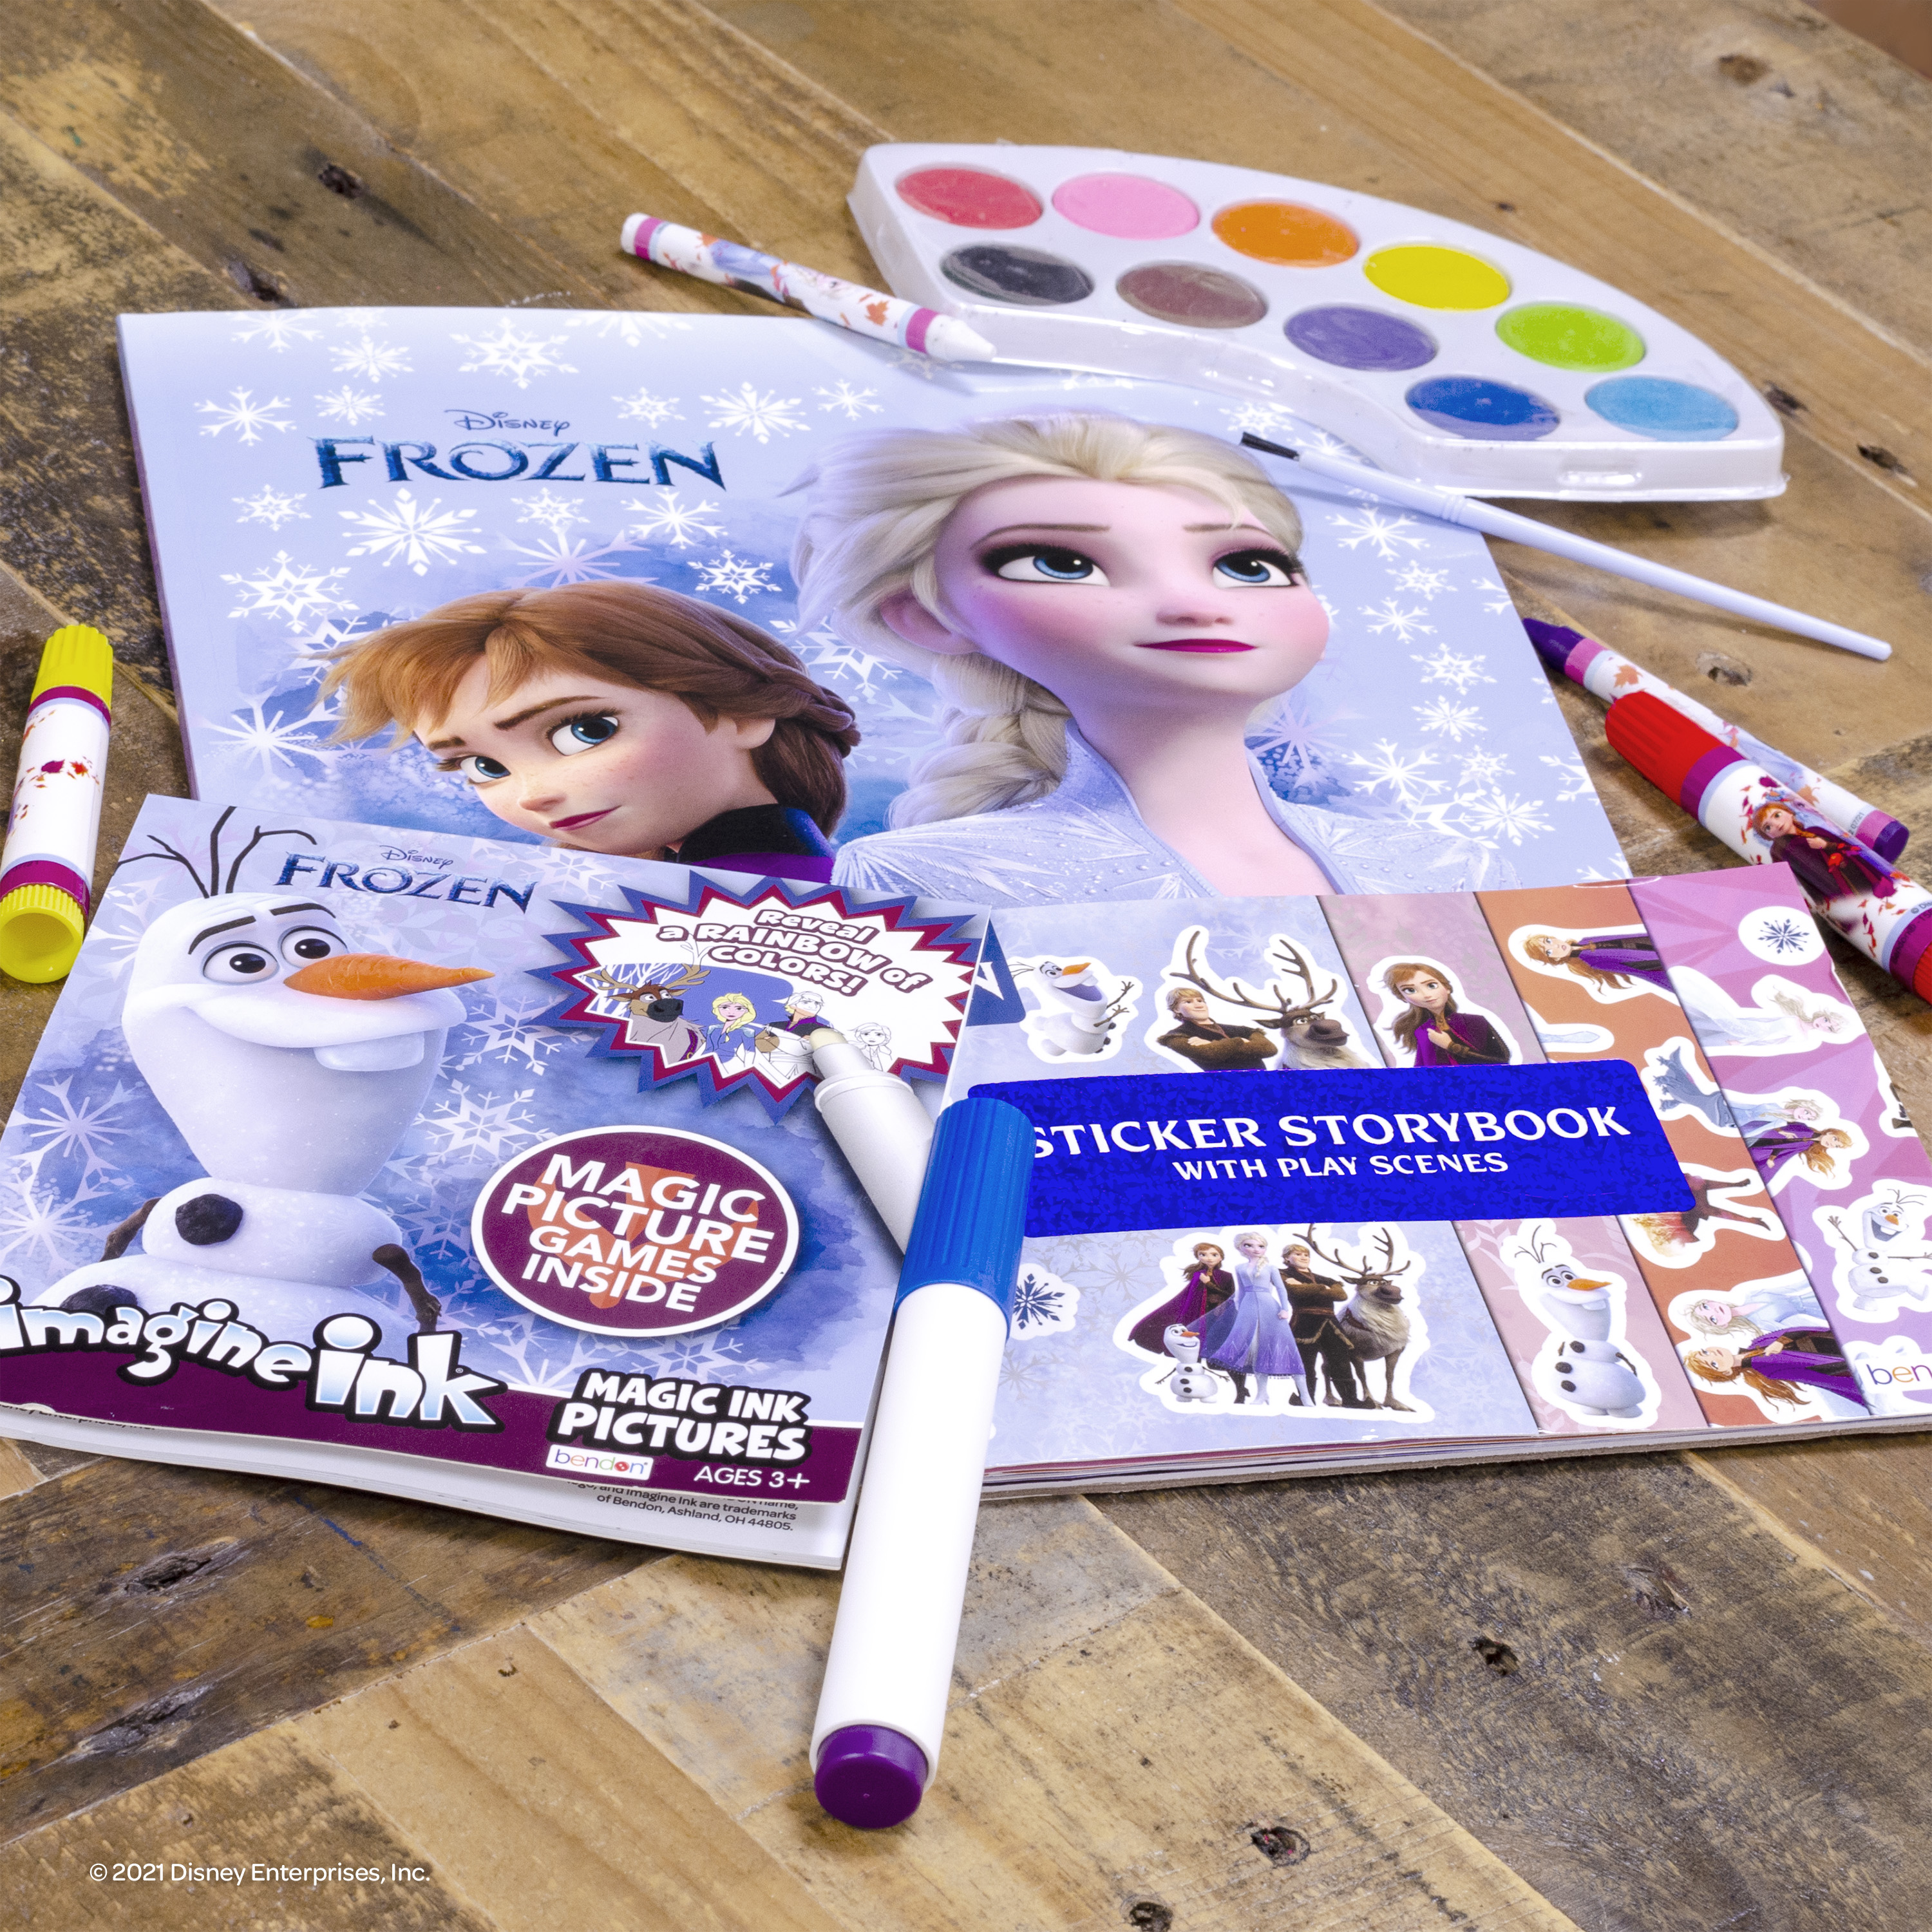 Disney Frozen World Of Art & Activity Kit with an Imagine Ink Book - image 4 of 8